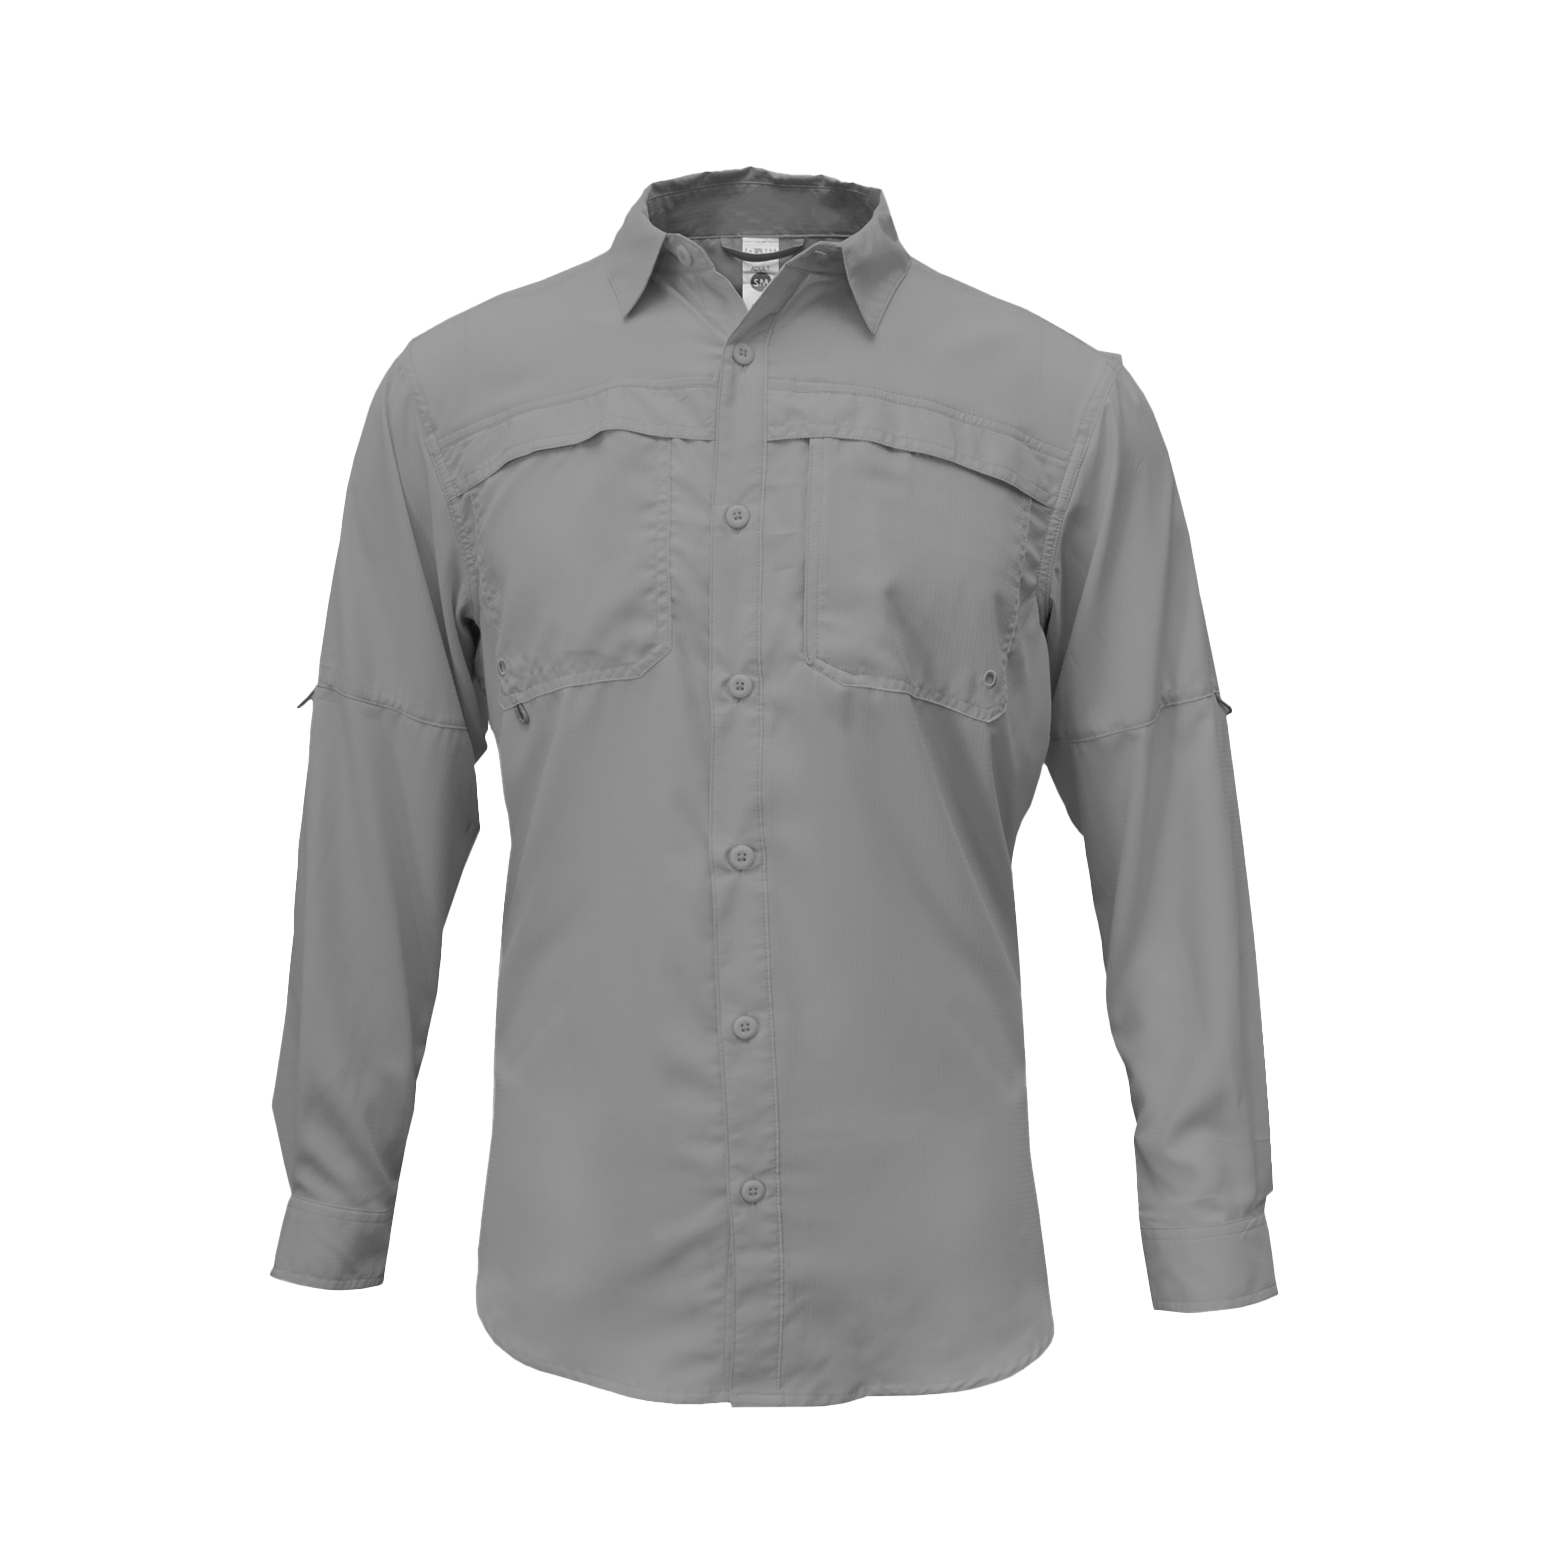 Wholesale Blank Fishing Shirts Products at Factory Prices from